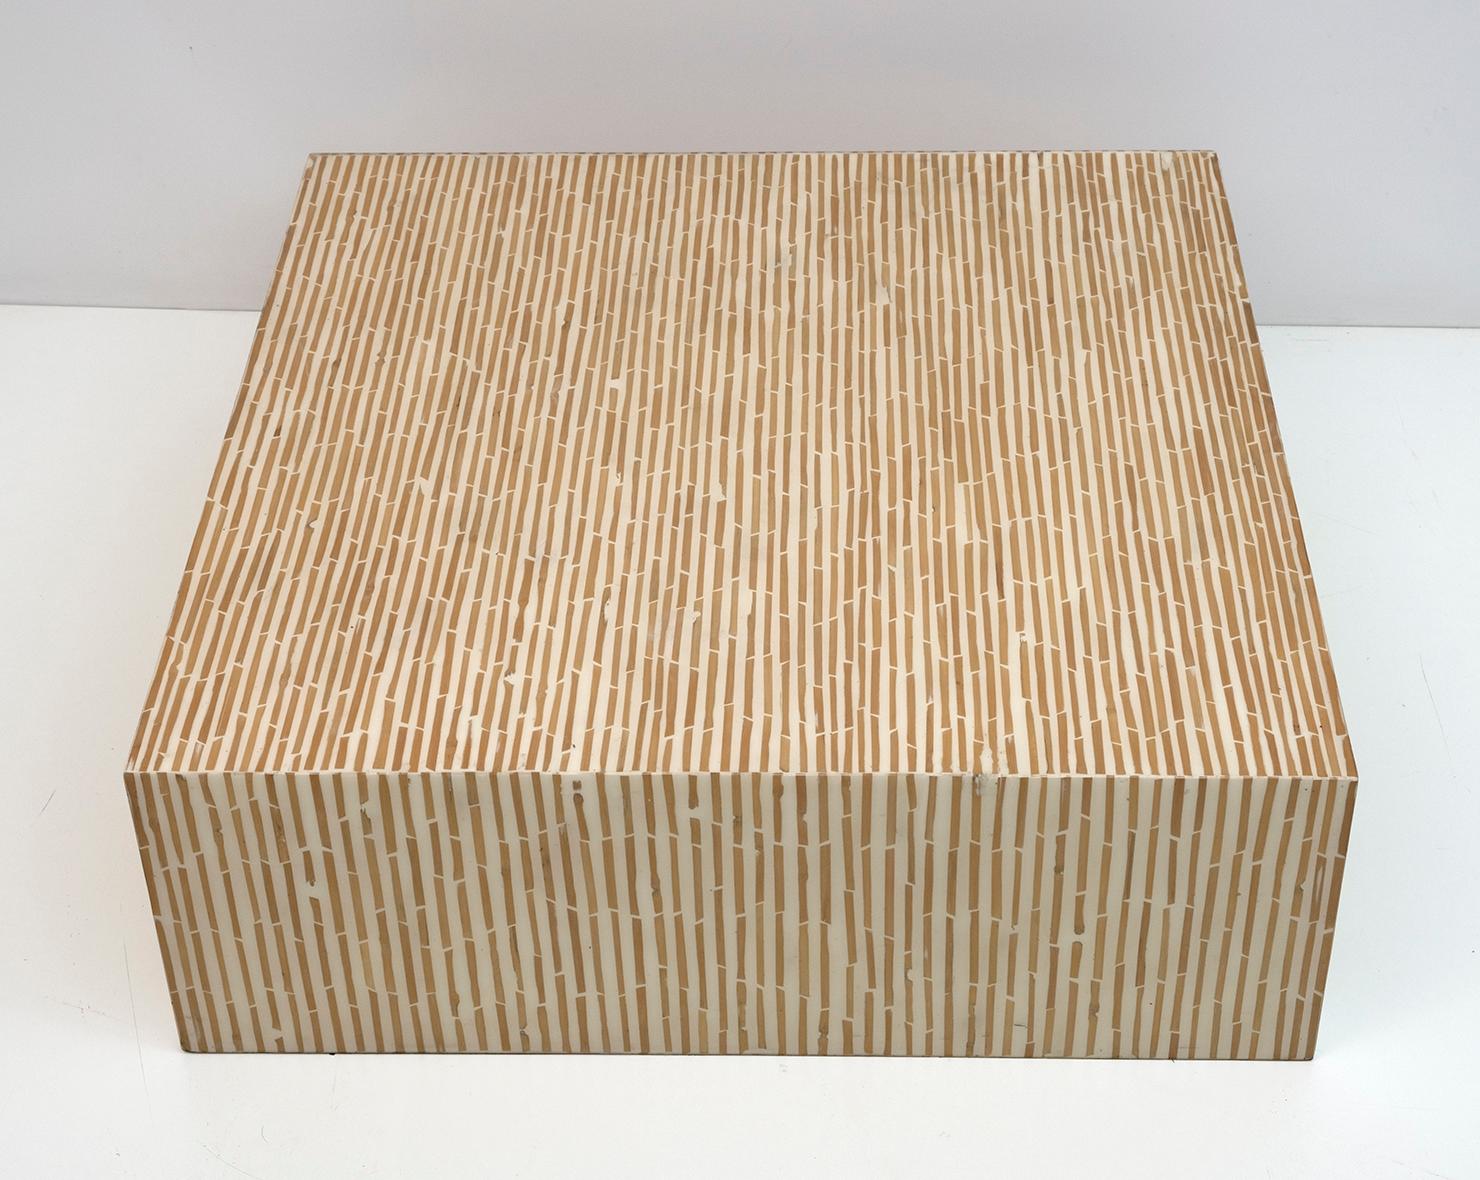 Late 20th Century Modern Italian Resin and Bamboo Coffee Table For Sale